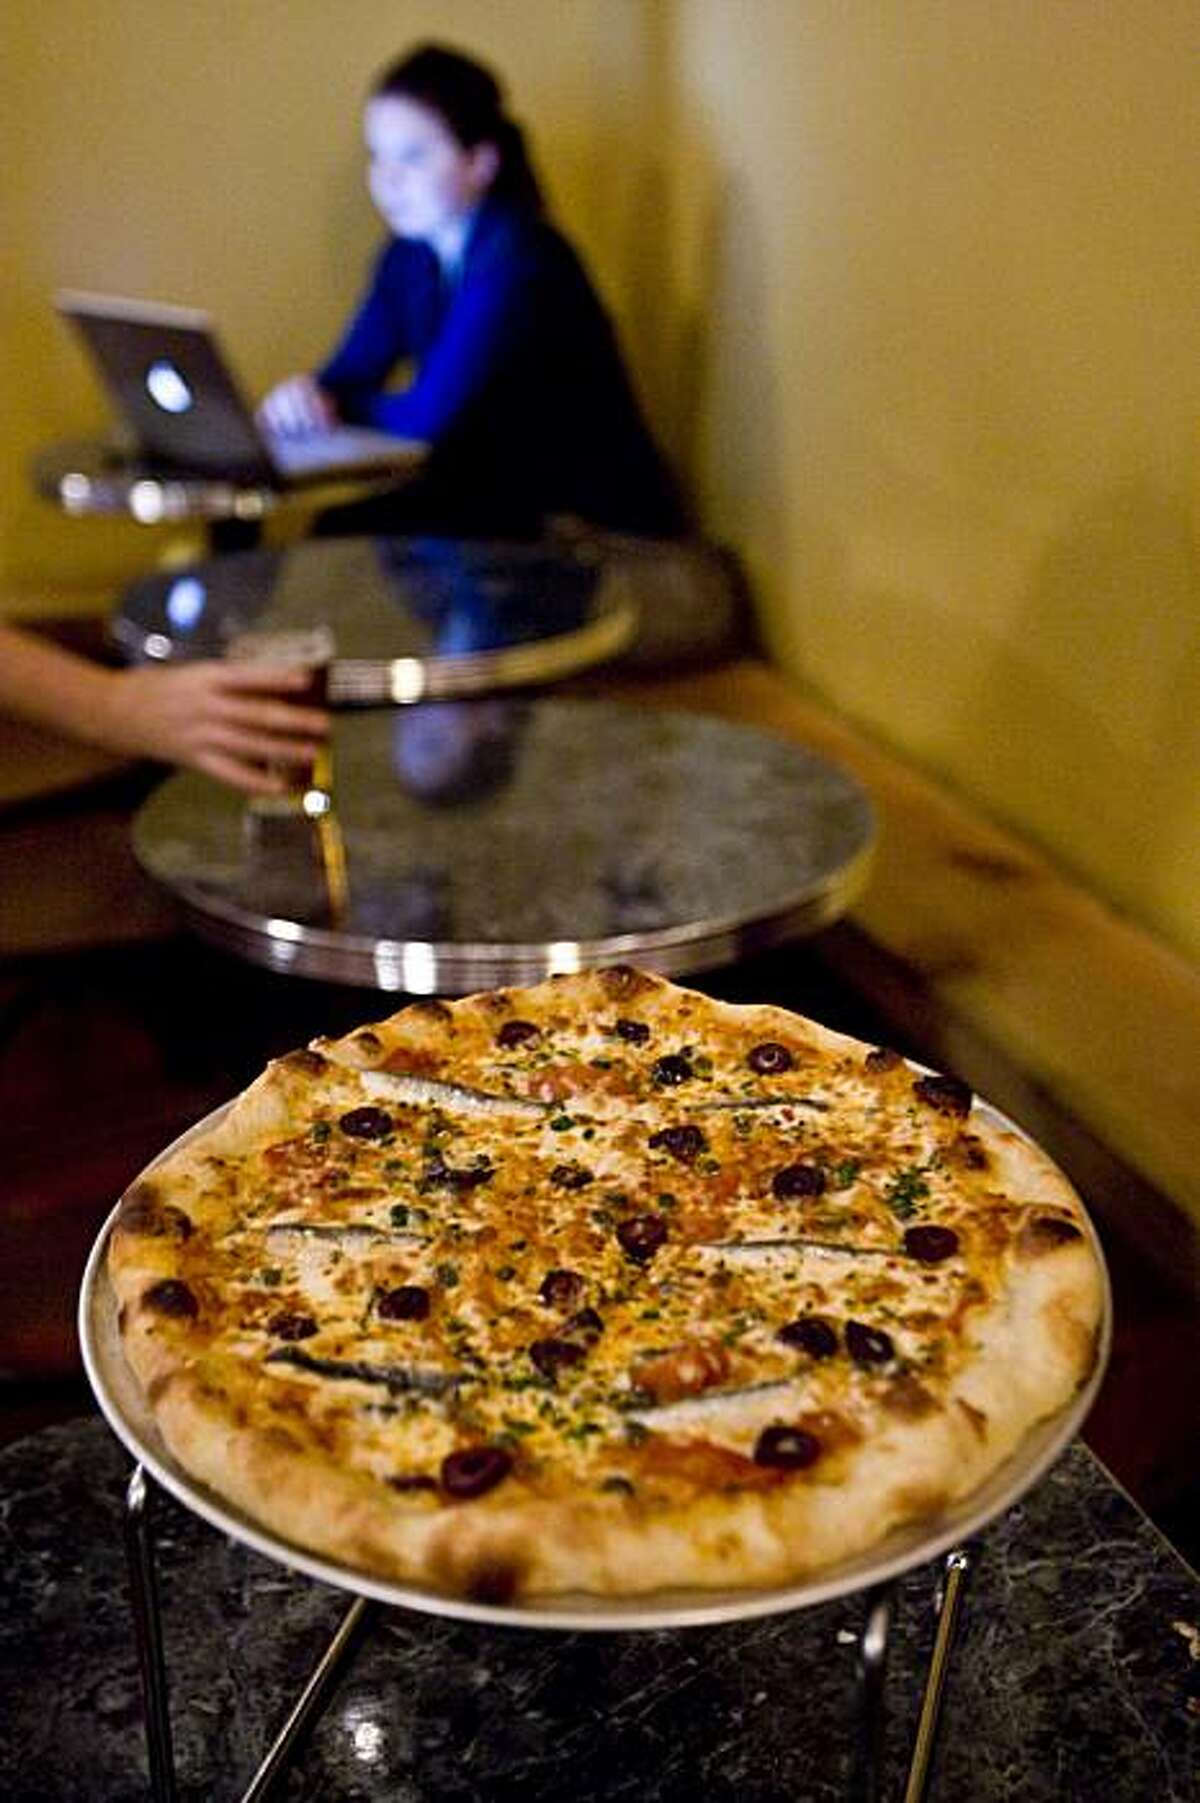 The Napoletana pizza at the Oakland location of Cafe Trieste on Piedmont Ave. in Oakland, Calif., on Monday, Dec. 14, 2009.